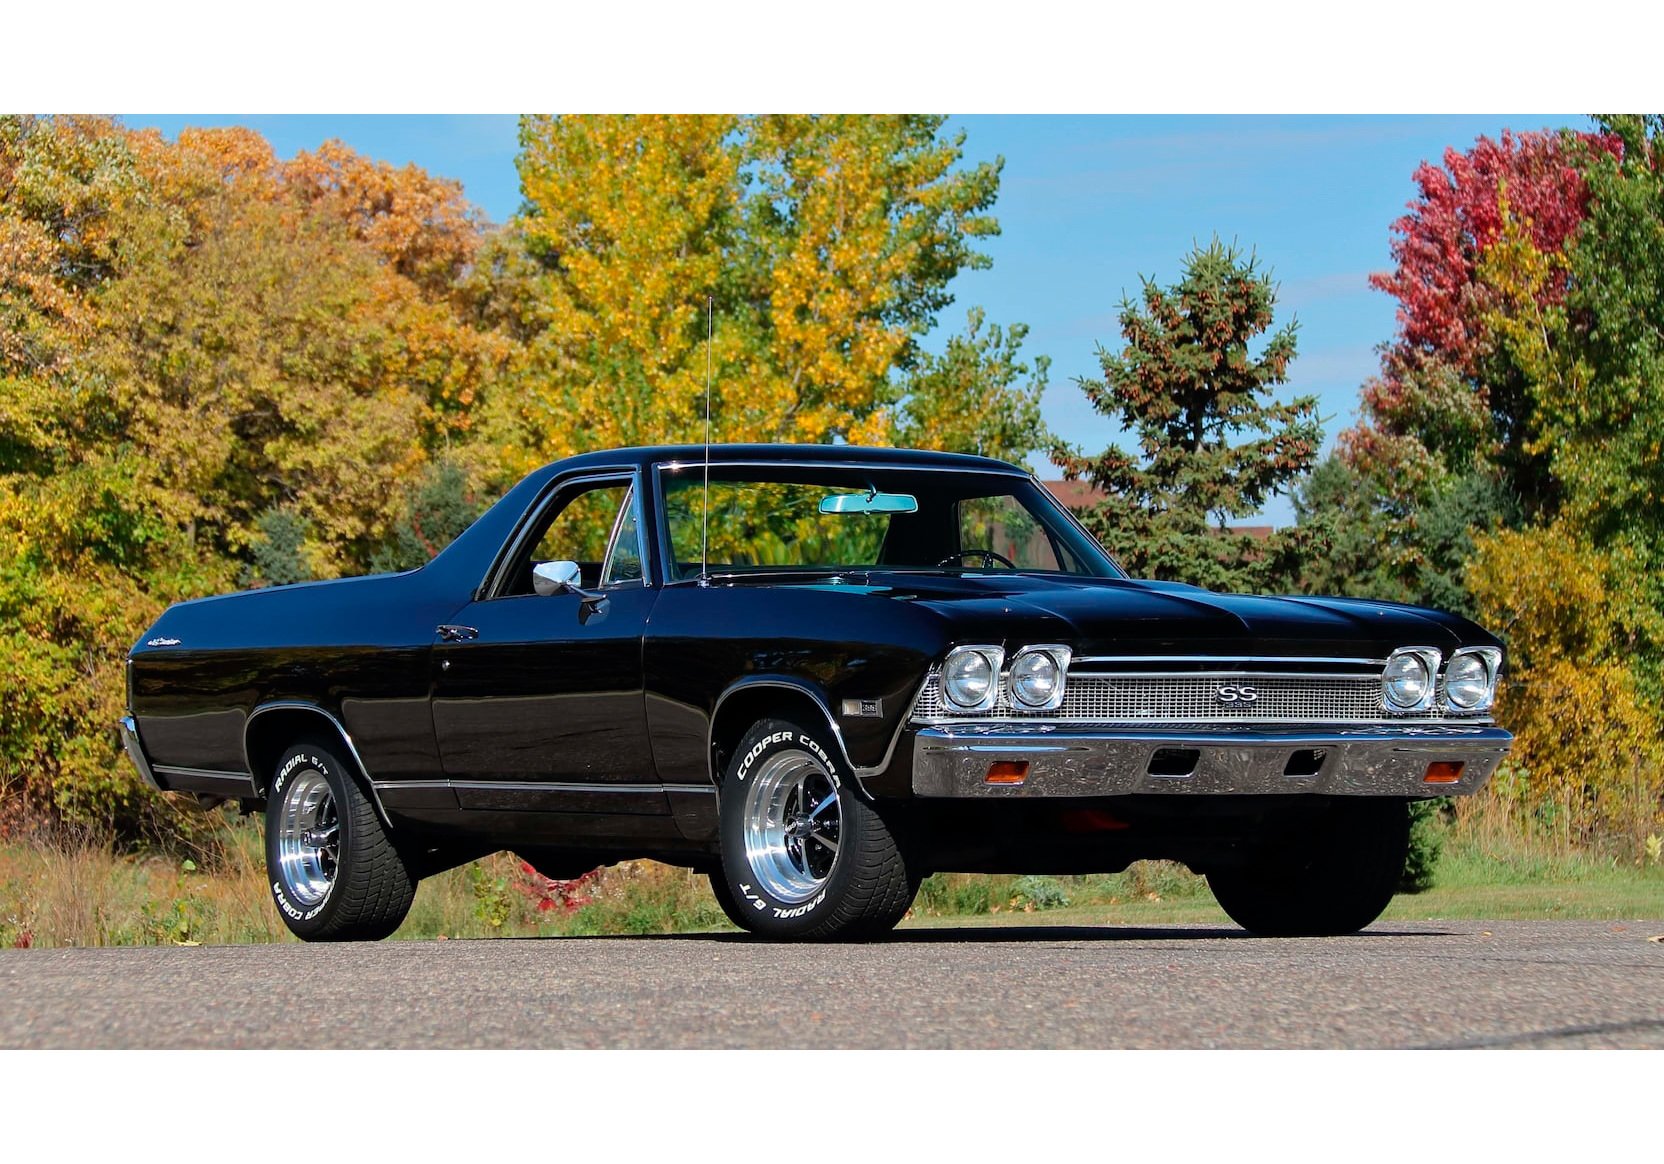   The Chevrolet El Camino SS was the high performance version of t...